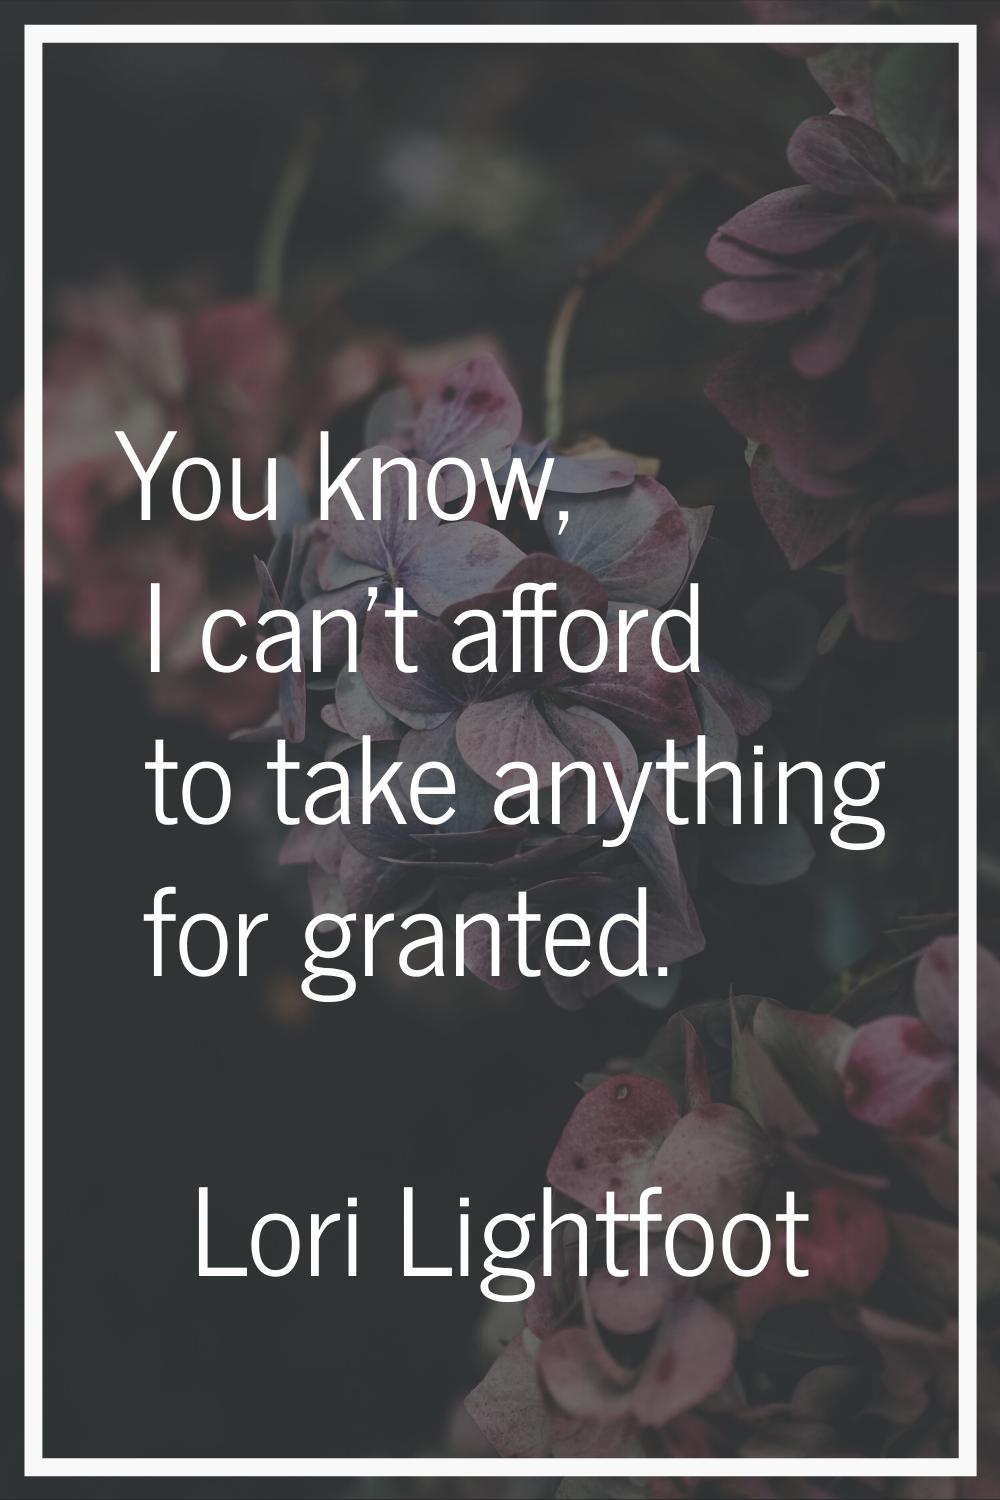 You know, I can't afford to take anything for granted.